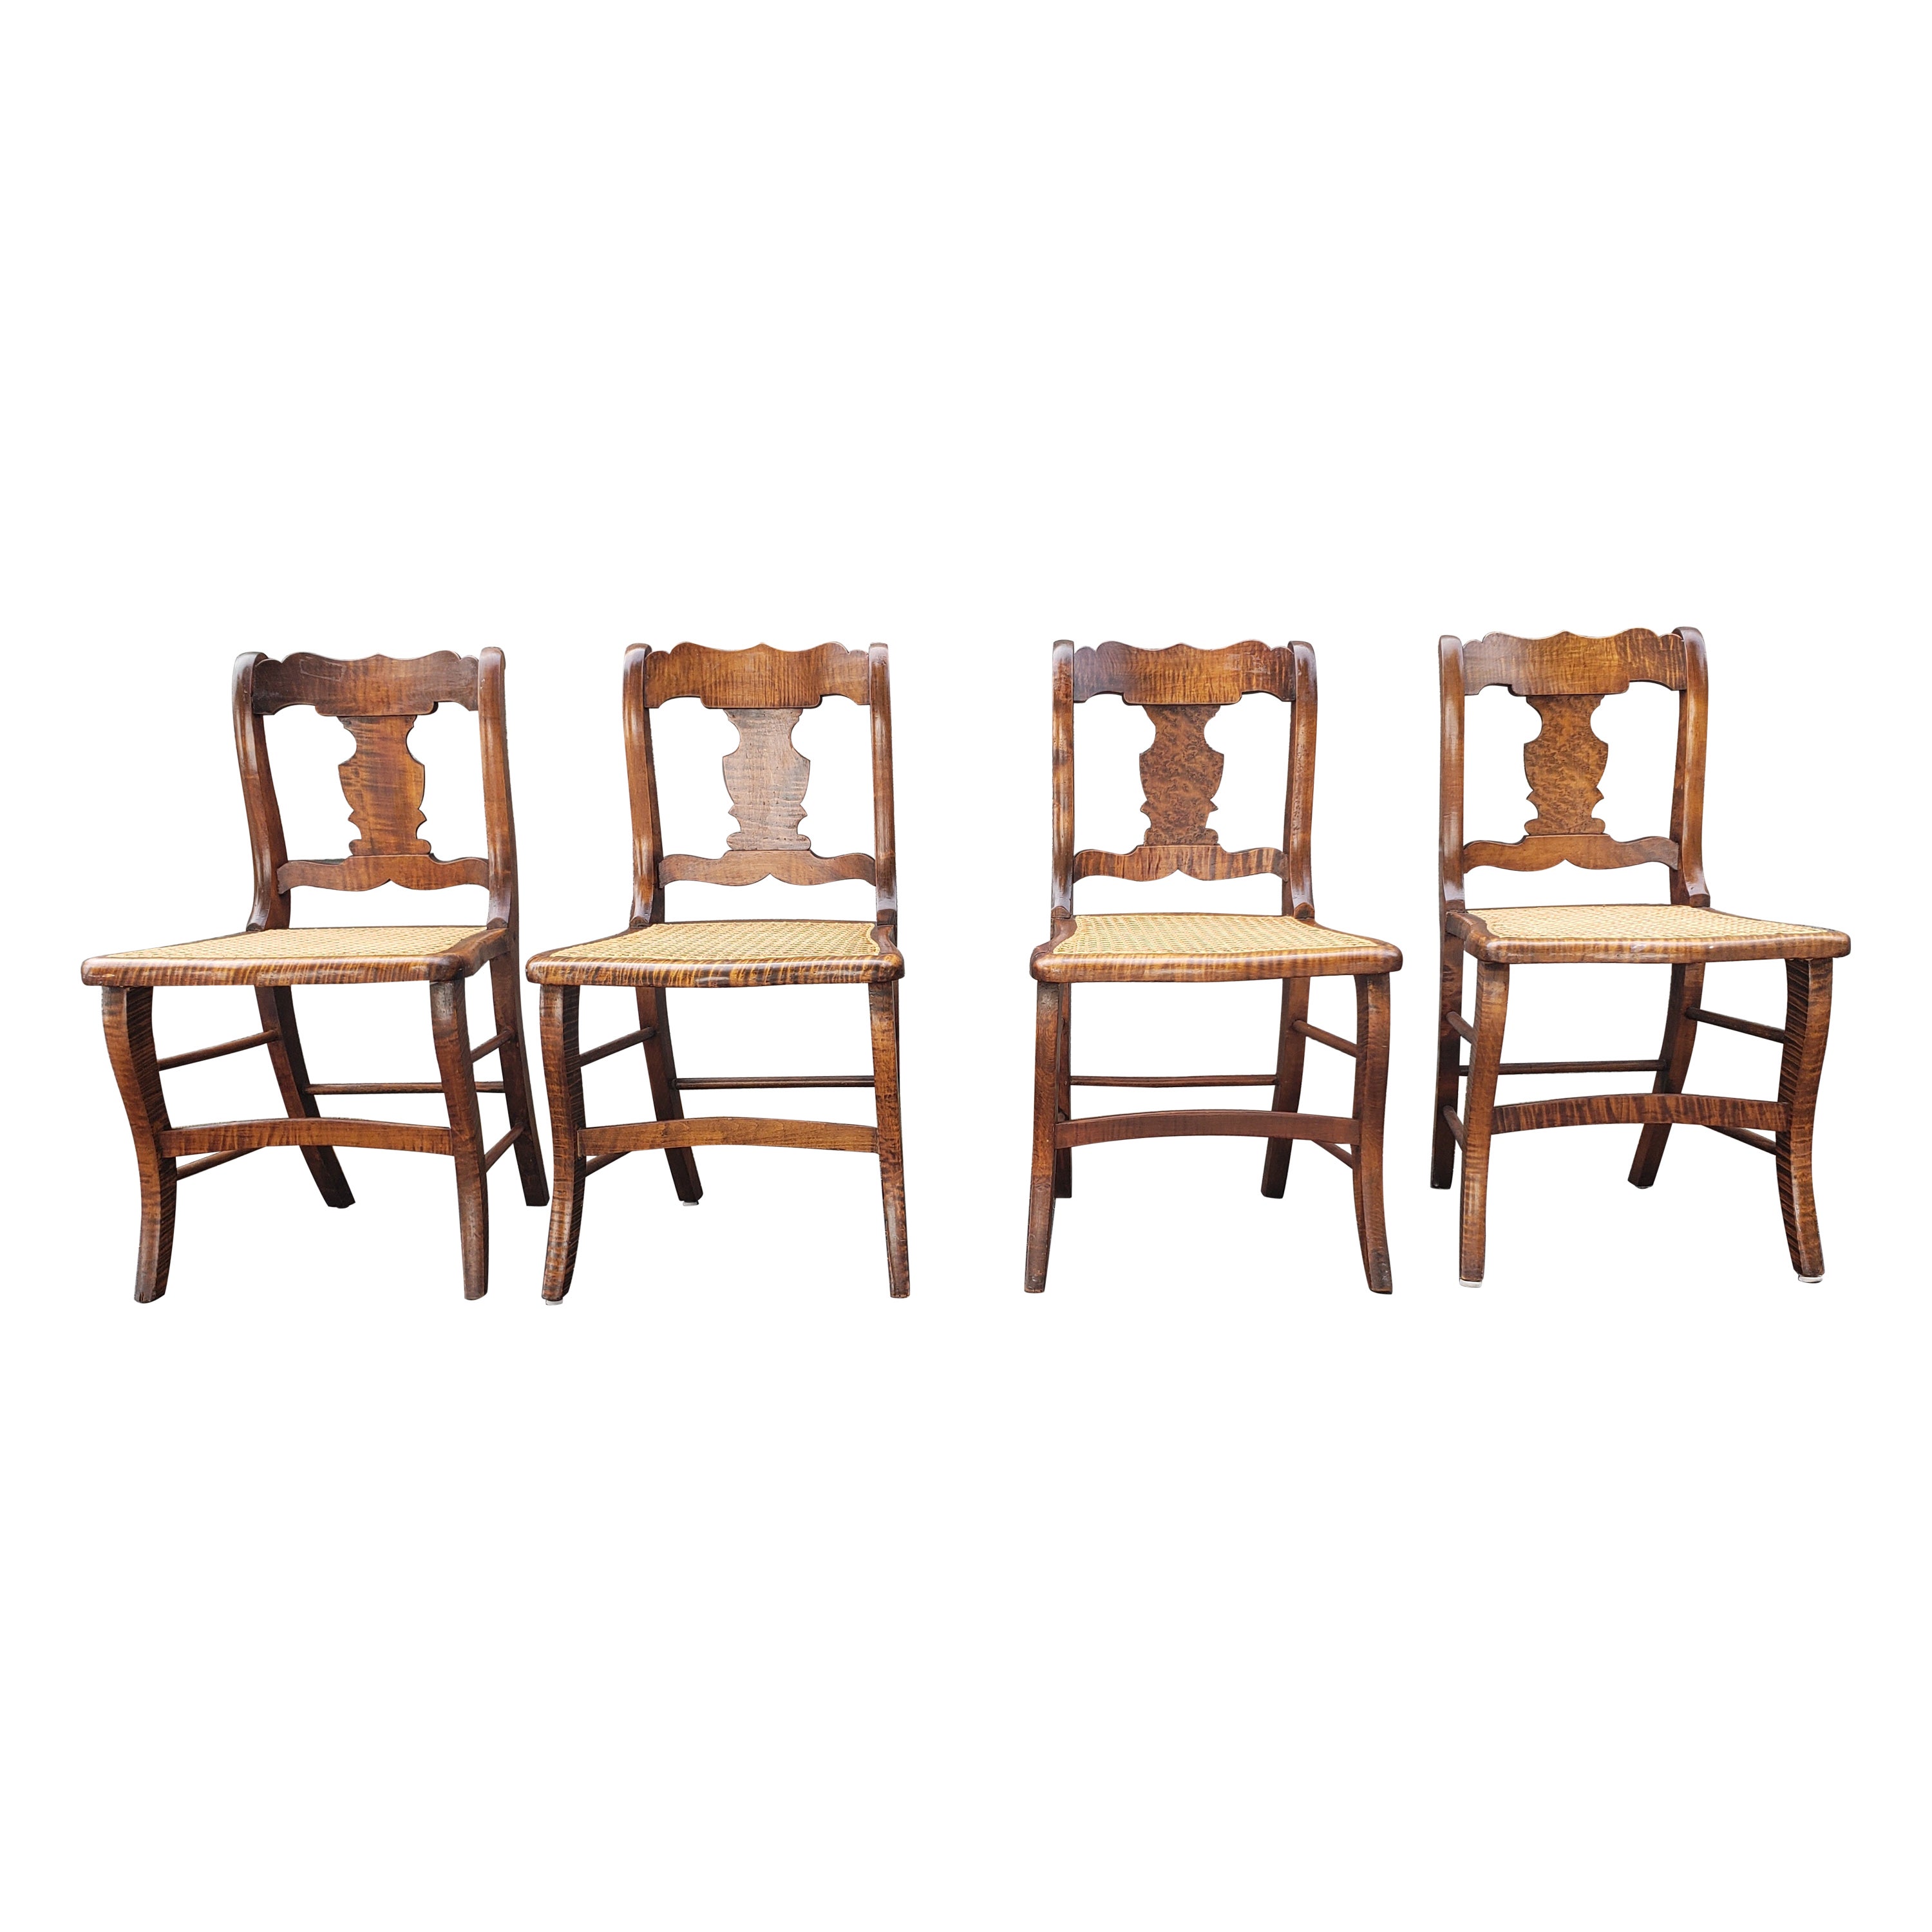 Early American Tiger Wood and Cane Seat Chairs, Set of 4 For Sale